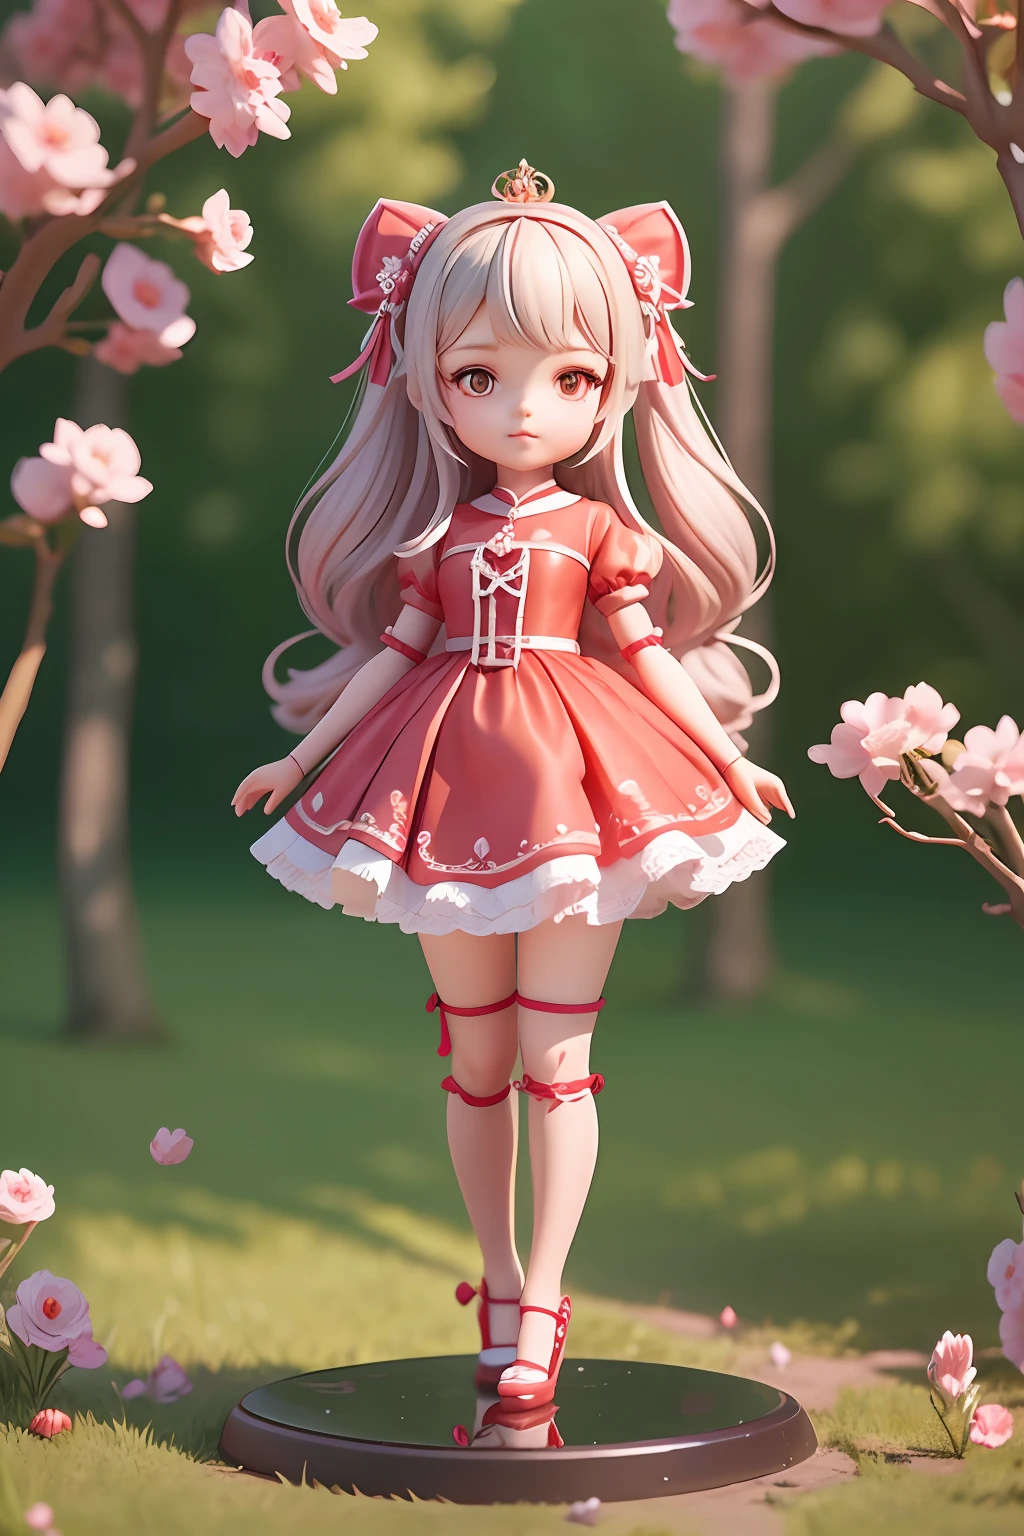 A cute  in a red dress，Like a princess，extremely cute，Detailed rendering with 3D rendering techniques，Stylized representation of digital art。Render a cute 3D anime girl，Stylized presentation，A cute ceramic doll and a super detailed fantasy character appear at the same time，are rendered in stylized 3D renderings。Cute images of forest creatures and digital art will also appear，The background depicts the atmosphere of April。